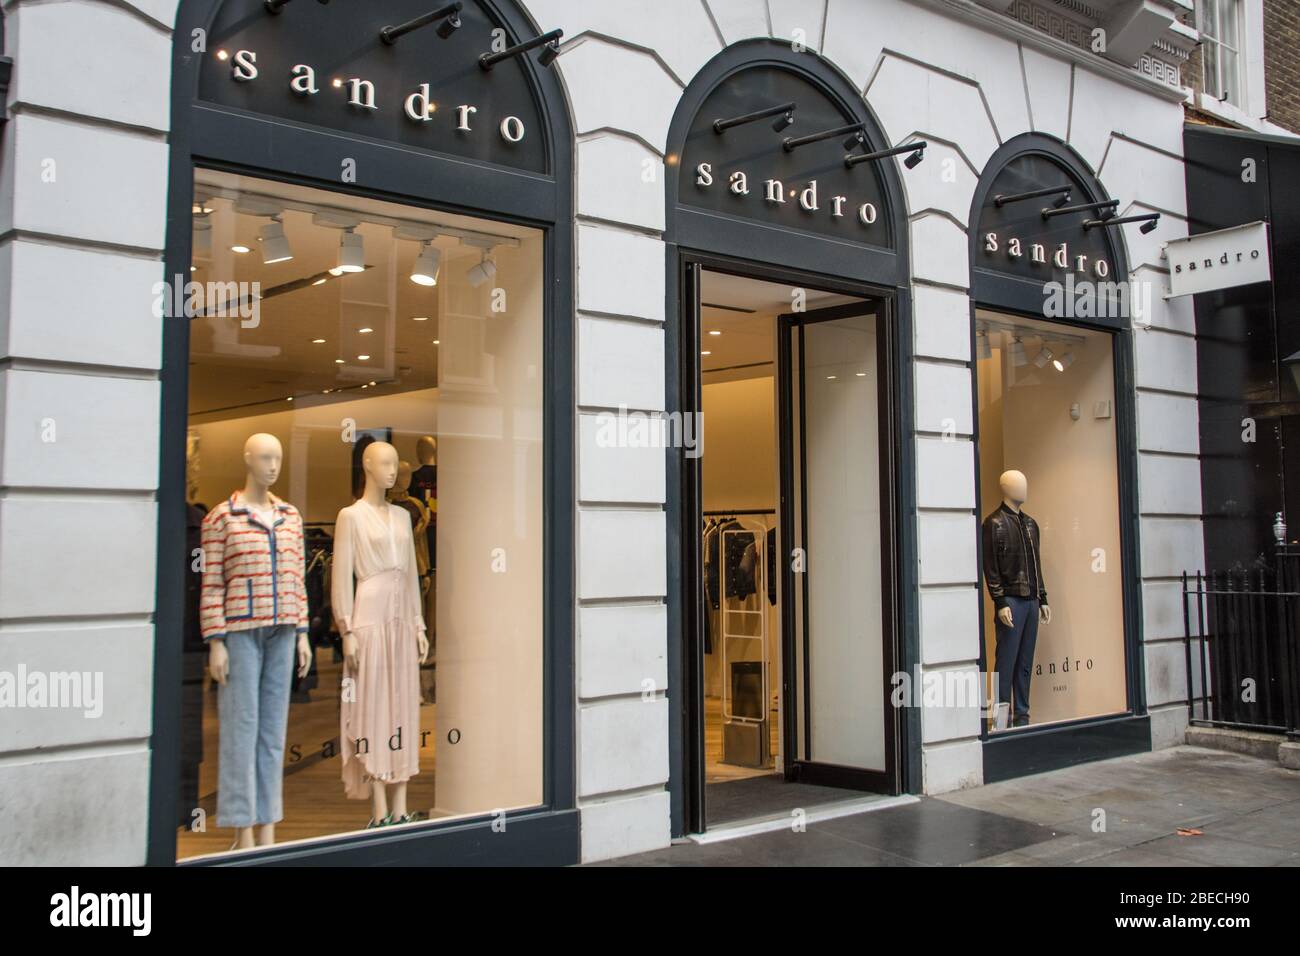 LONDON- MARCH, 2019: Exterior of Sandro fashion shop in Covent Garden ...